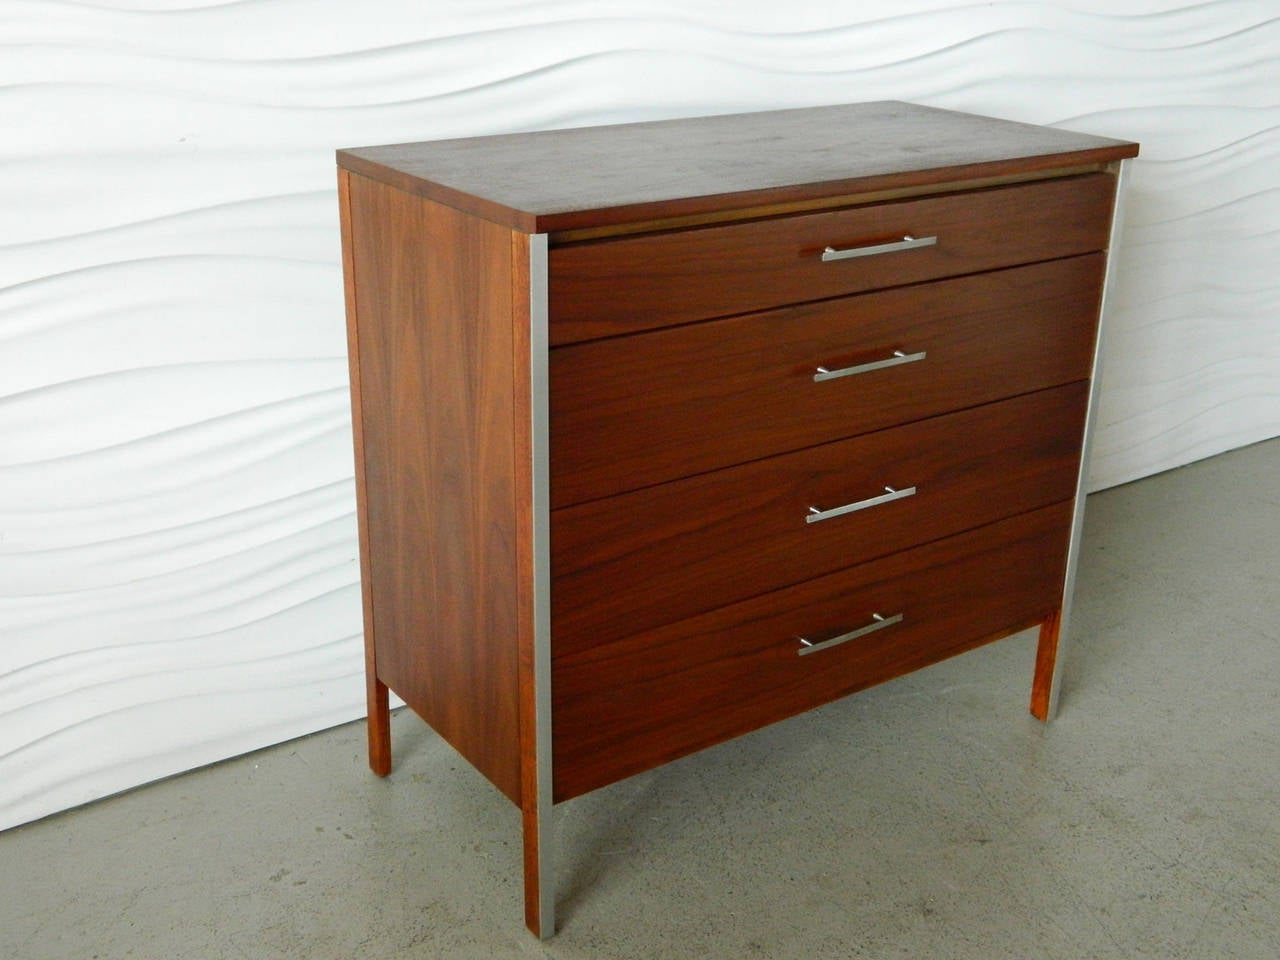 Designed by American designer Paul McCobb for Calvin Furniture, this warm tone walnut chest of drawers has aluminum trim accents and drawer pulls.